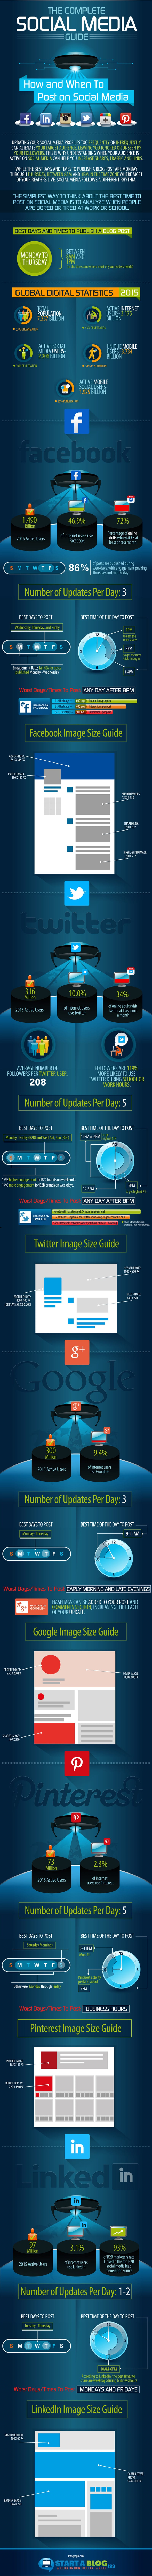 infographic showing the best times to post on social media - infographic